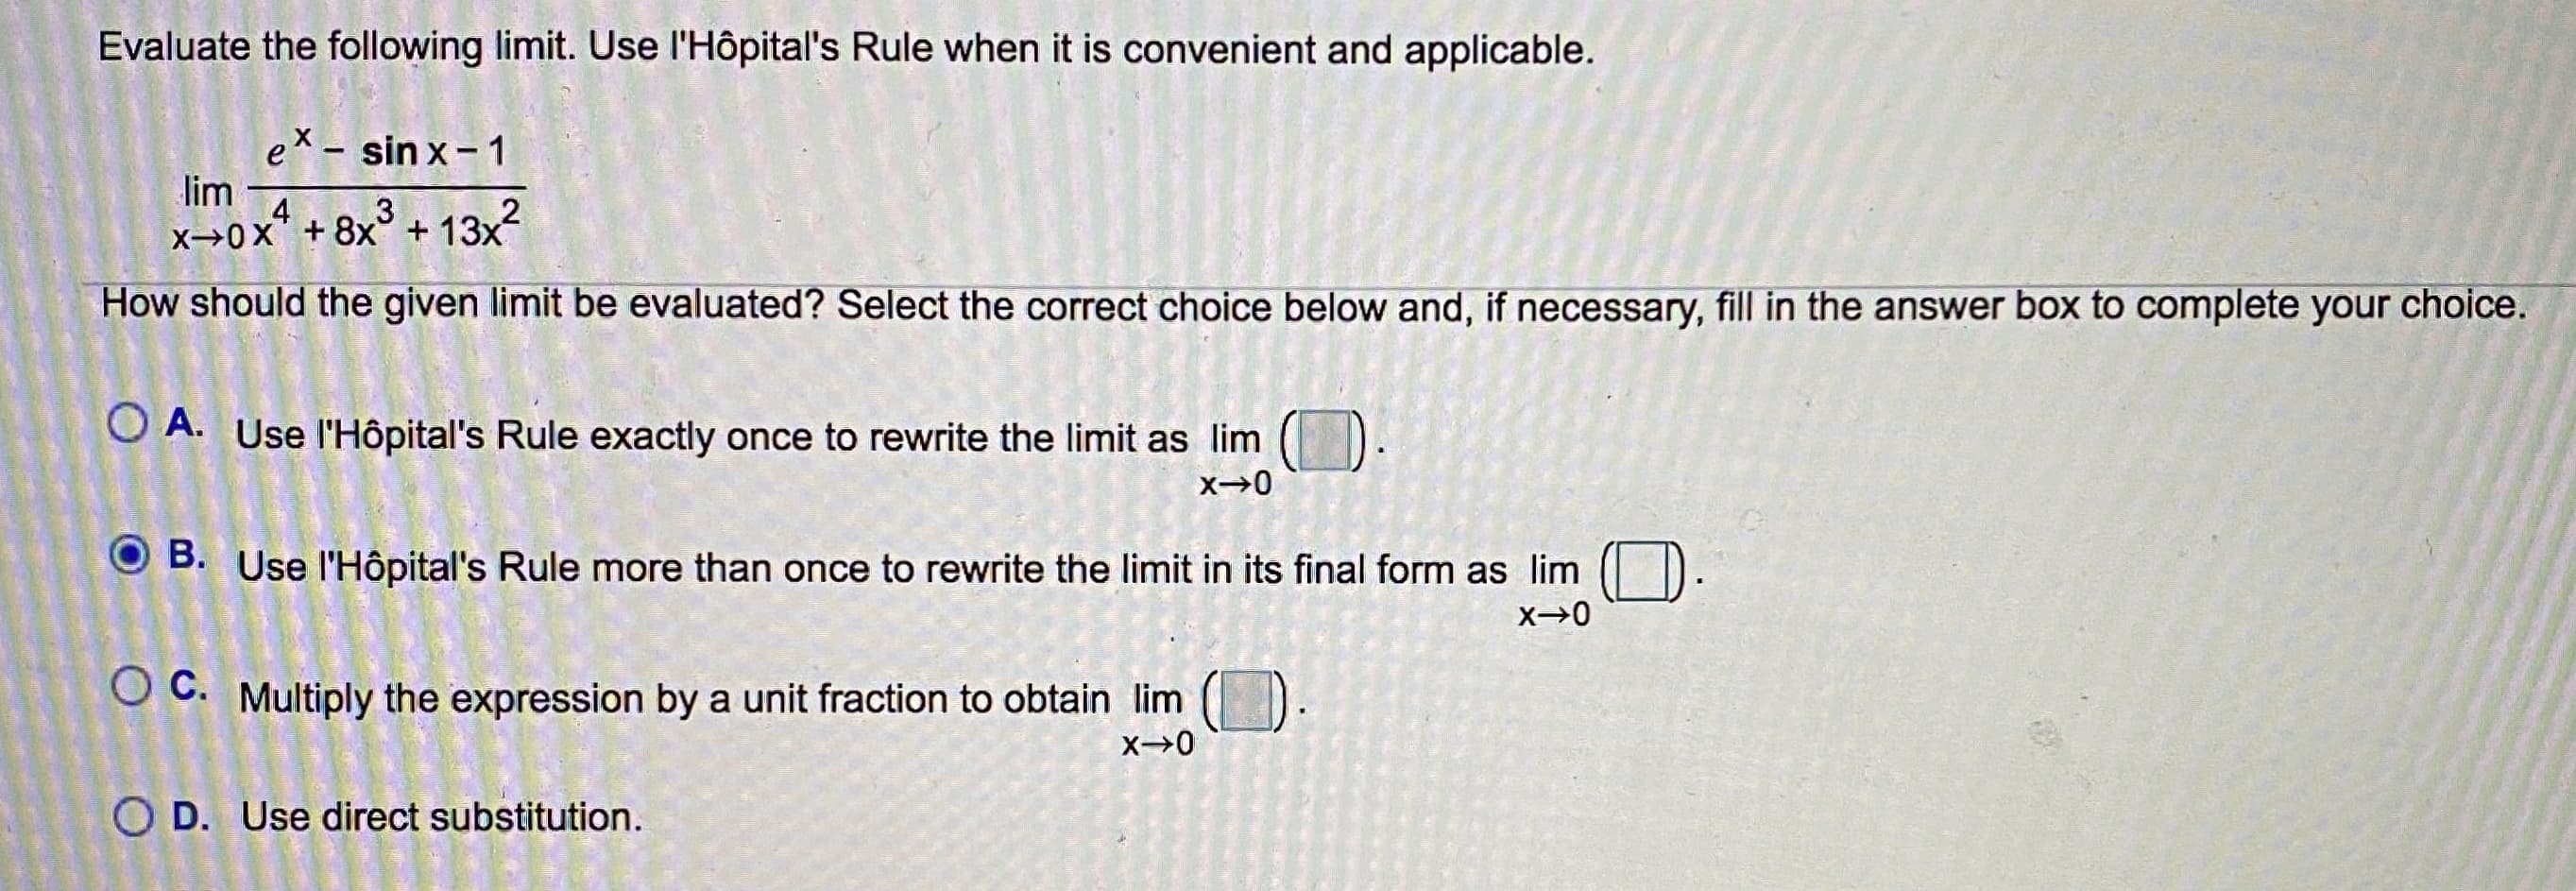 Evaluate the following limit. Use l'Hôpital's Rule when it is convenient and applicable.
ex - sin x- 1
lim
x→0x* + 8x° + 13x?
How should the given limit be evaluated? Select the correct choice below and, if necessary, fill in the answer box to complete your choice.
O A. Use l'Hôpital's Rule exactly once to rewrite the limit as lim ()
O B. Use l'Hôpital's Rule more than once to rewrite the limit in its final form as lim D.
X→0
O C. Multiply the expression by a unit fraction to obtain lim ().
O D. Use direct substitution.
